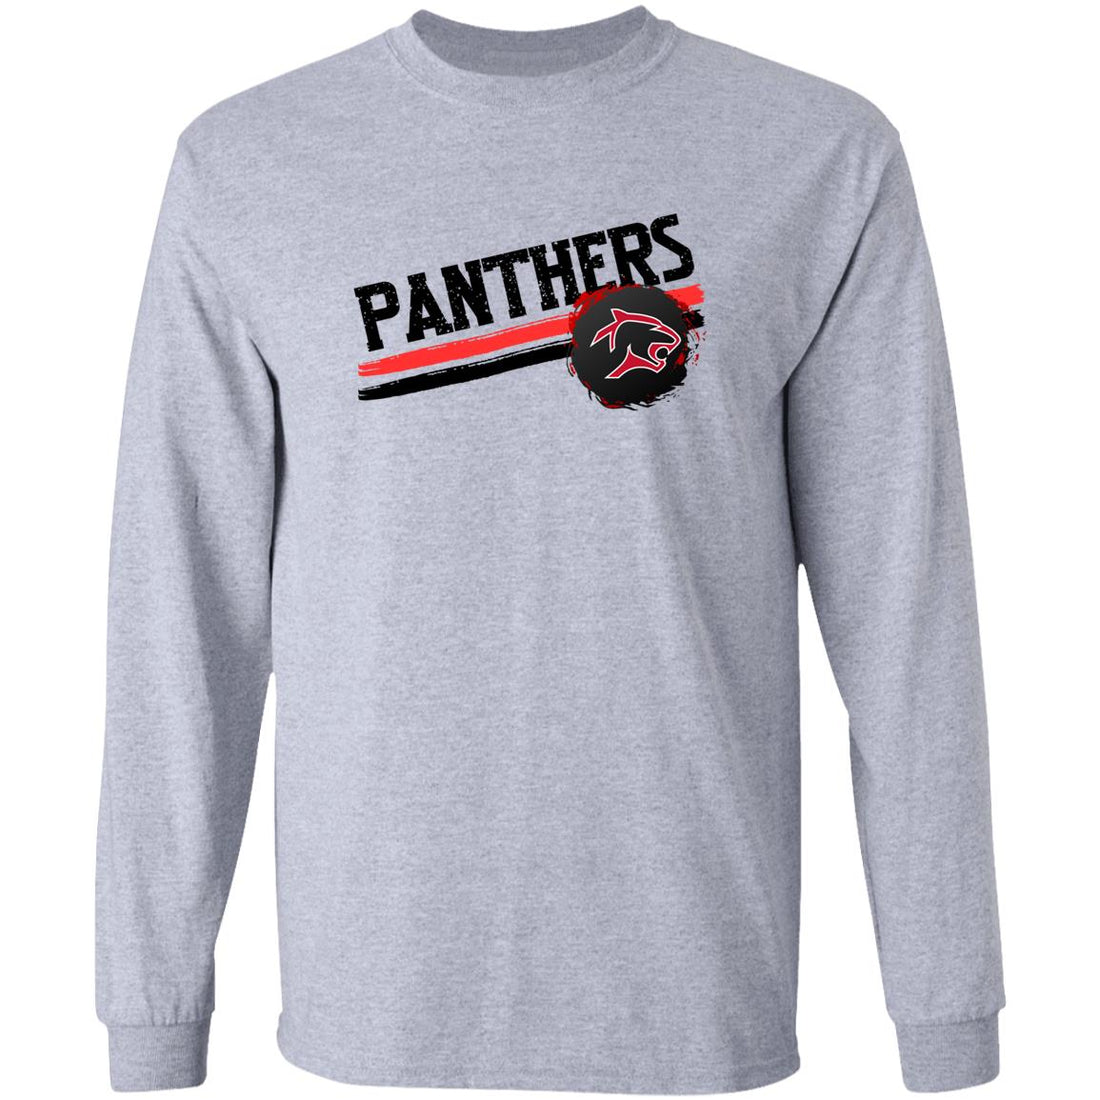 Great Bend Panthers Long Sleeve Tees - Positively Sassy